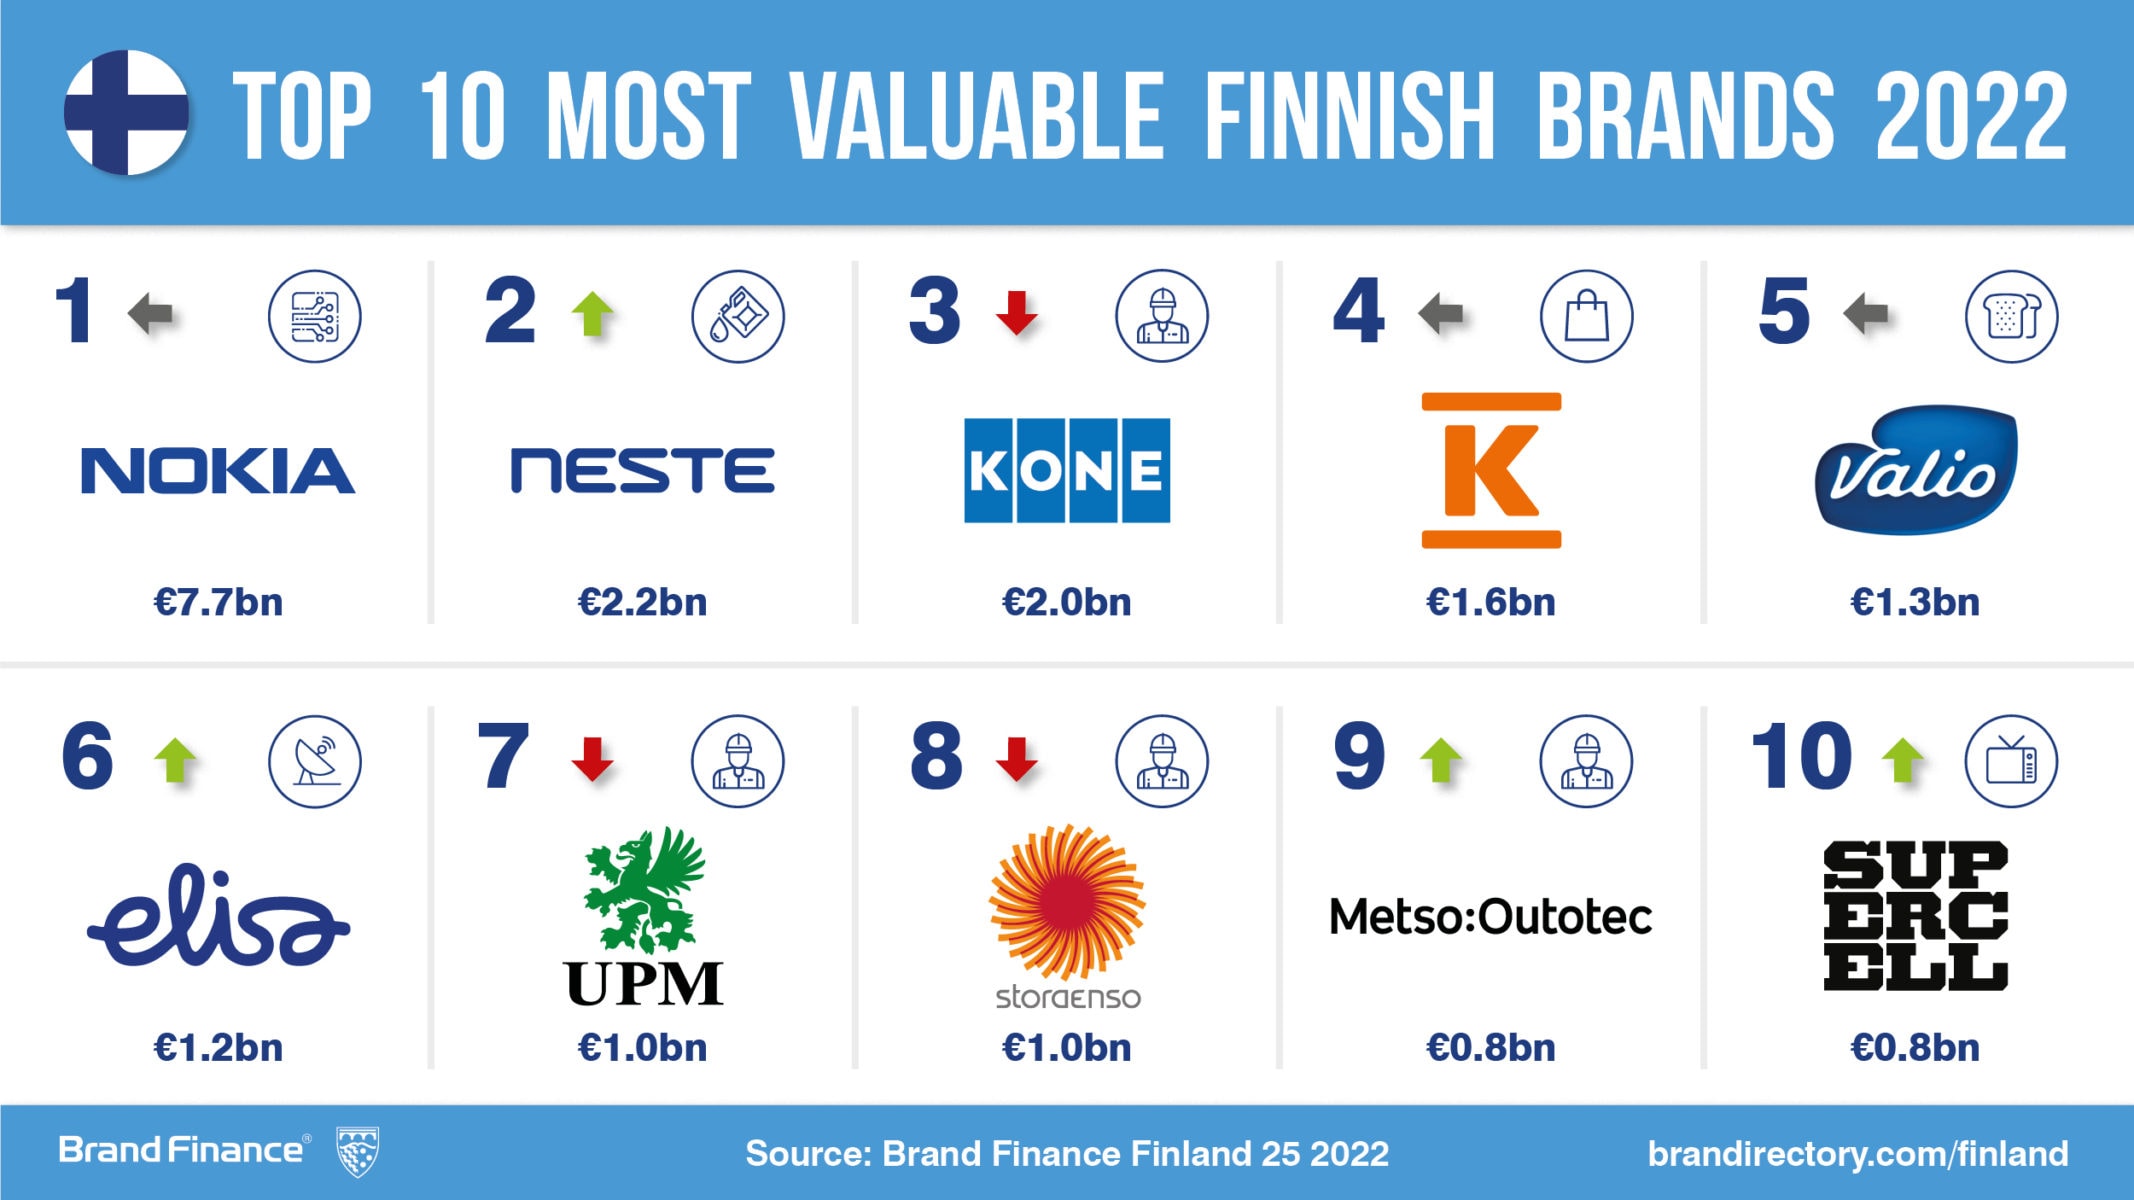 Top Finnish brands are roaring back to life with big gains in value ...